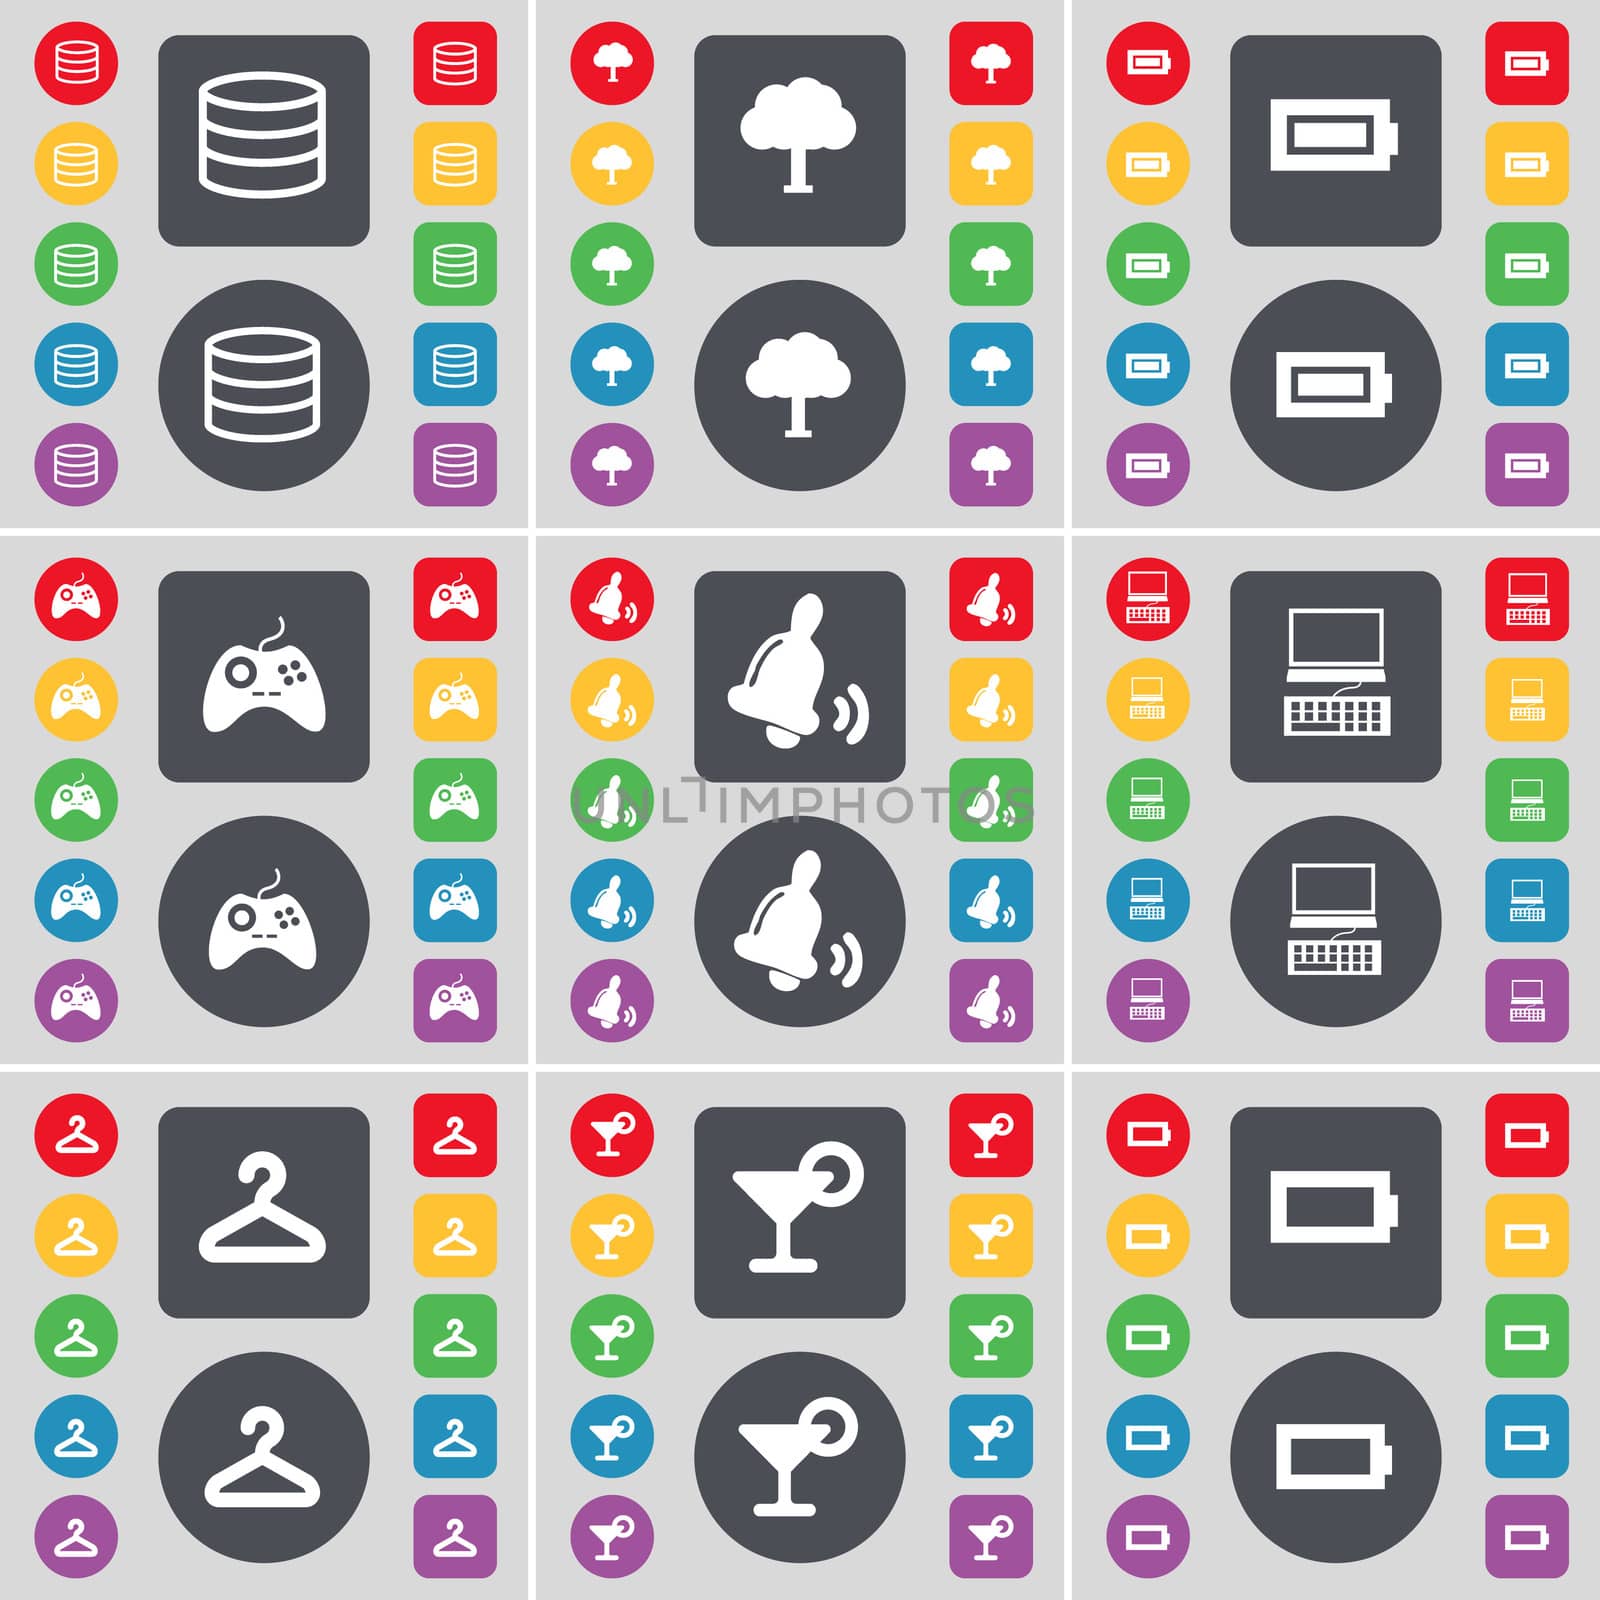 Database, Tree, Battery, Gamepad, Bell, Laptop, Hanger, Cocktail, Battery icon symbol. A large set of flat, colored buttons for your design. illustration